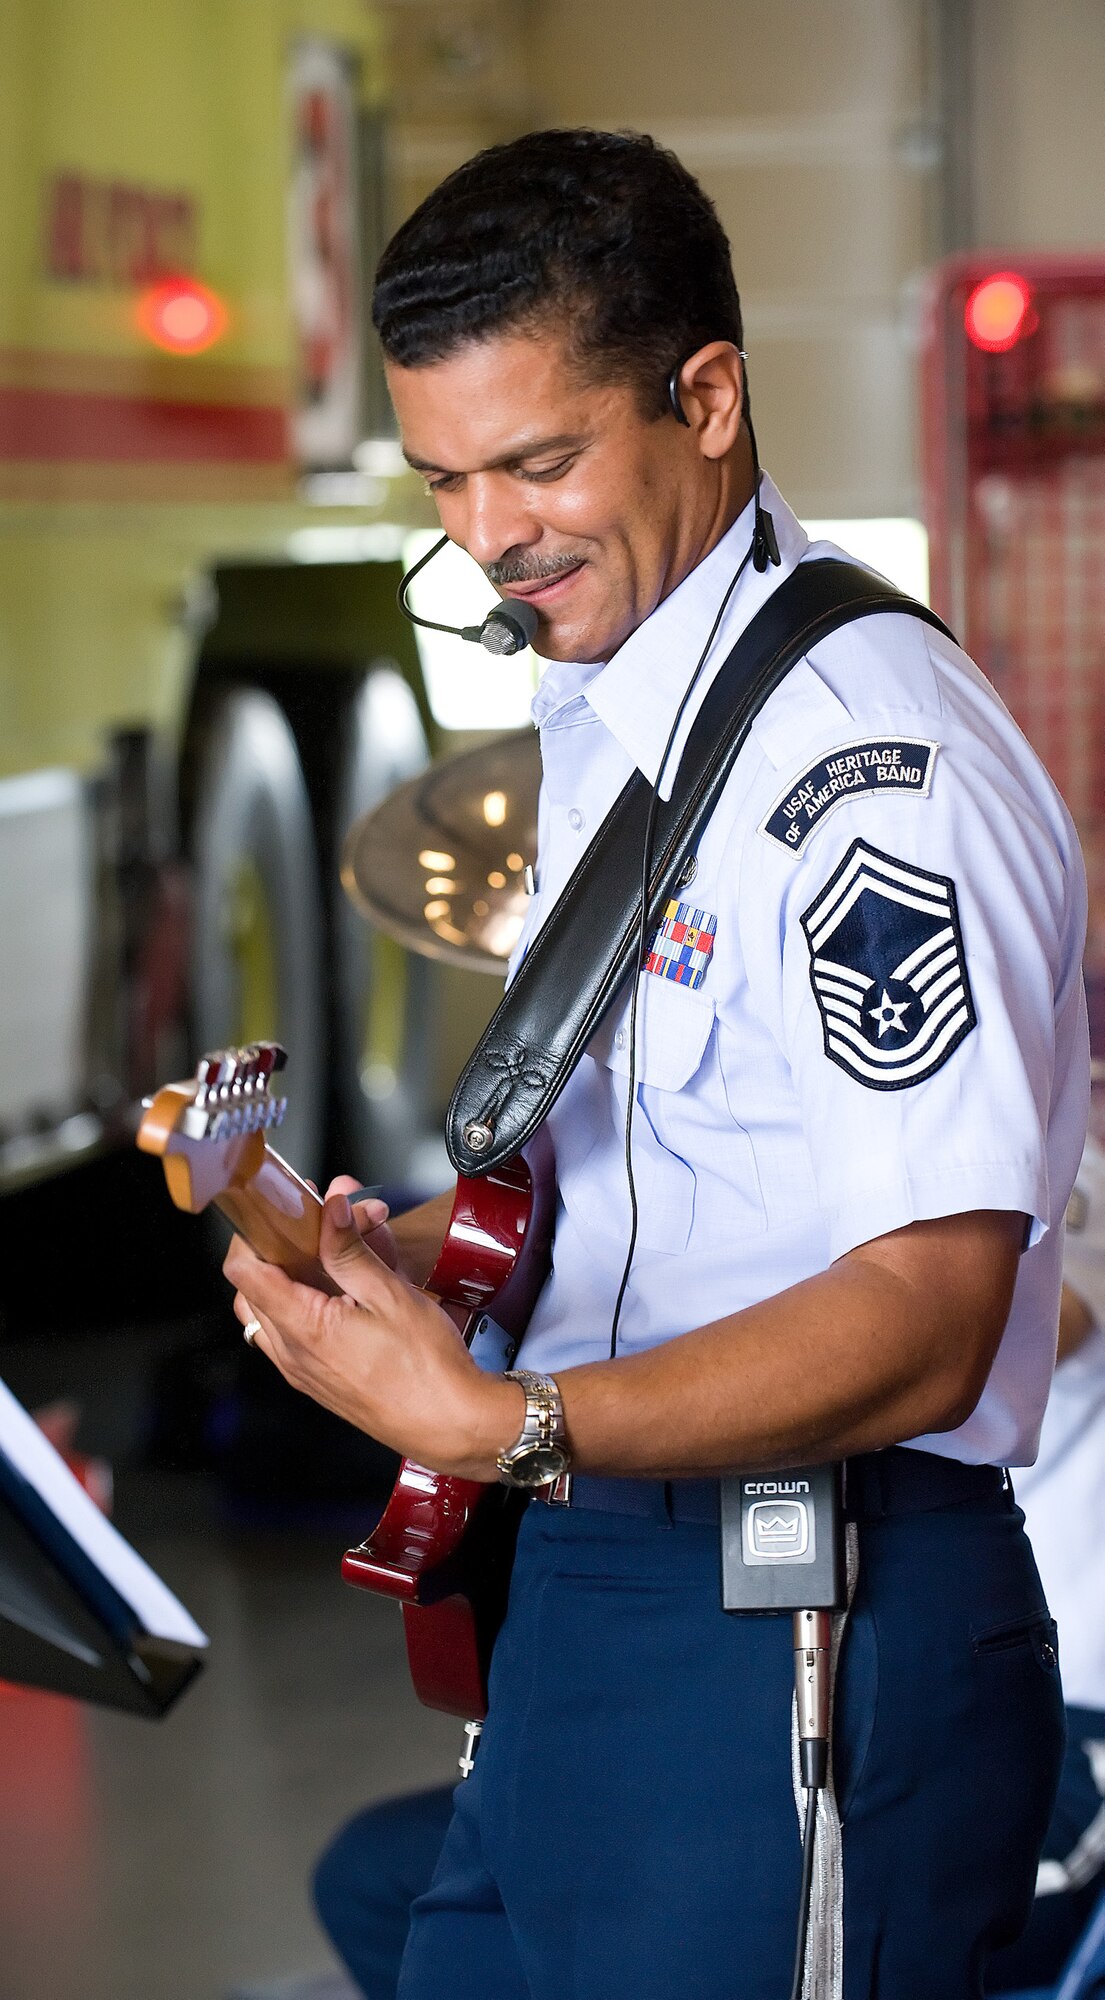 Senior Master Sgt. Ballard Sully plays the guitar during a performance at the Fire Station on Dover Air Force Base June 15. Sergeant Sully is the non-commissioned officer in charge of Vector, a traveling ensemble from the Heritage of America Band stationed at Langley Air Force Base, Va. (U.S. Air Force photo/Tom Randle)